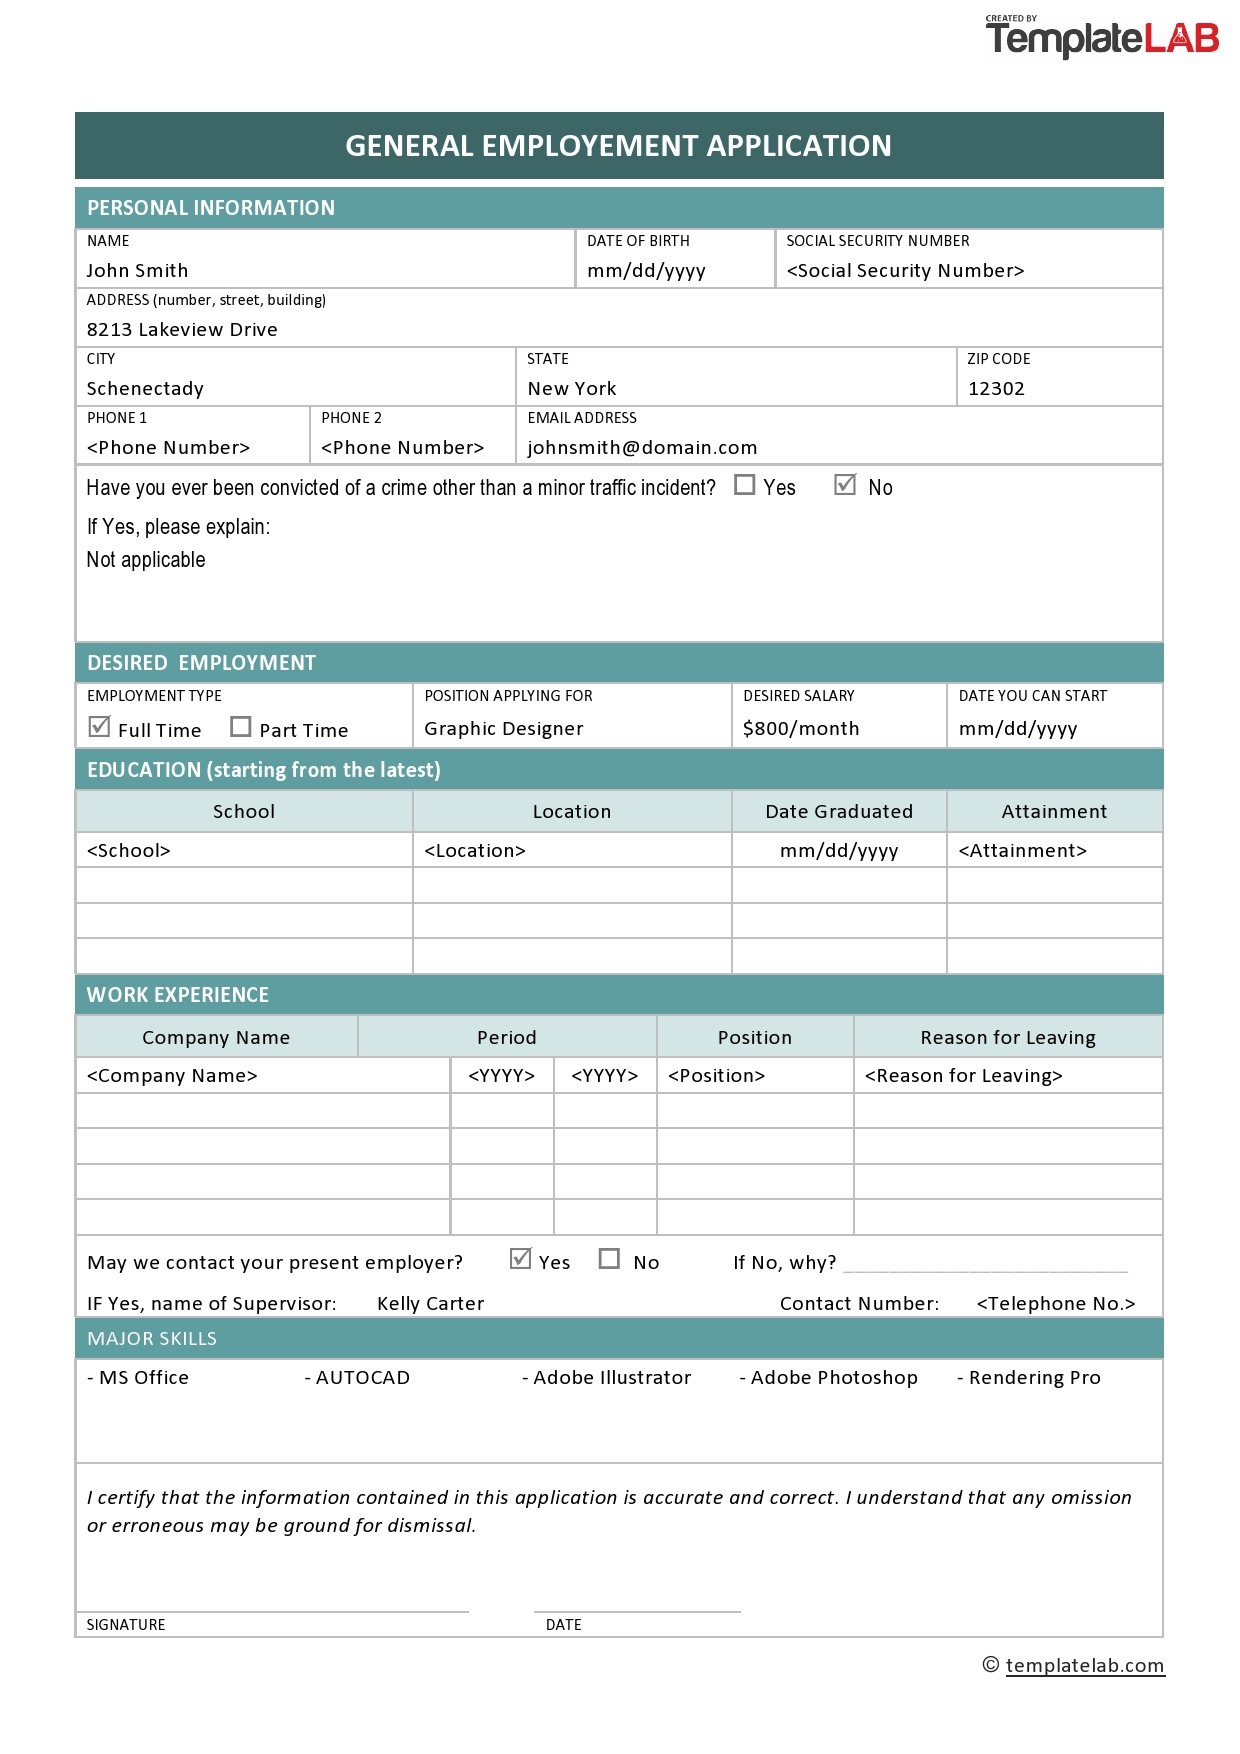 printable-general-job-application-forms-printable-forms-free-online